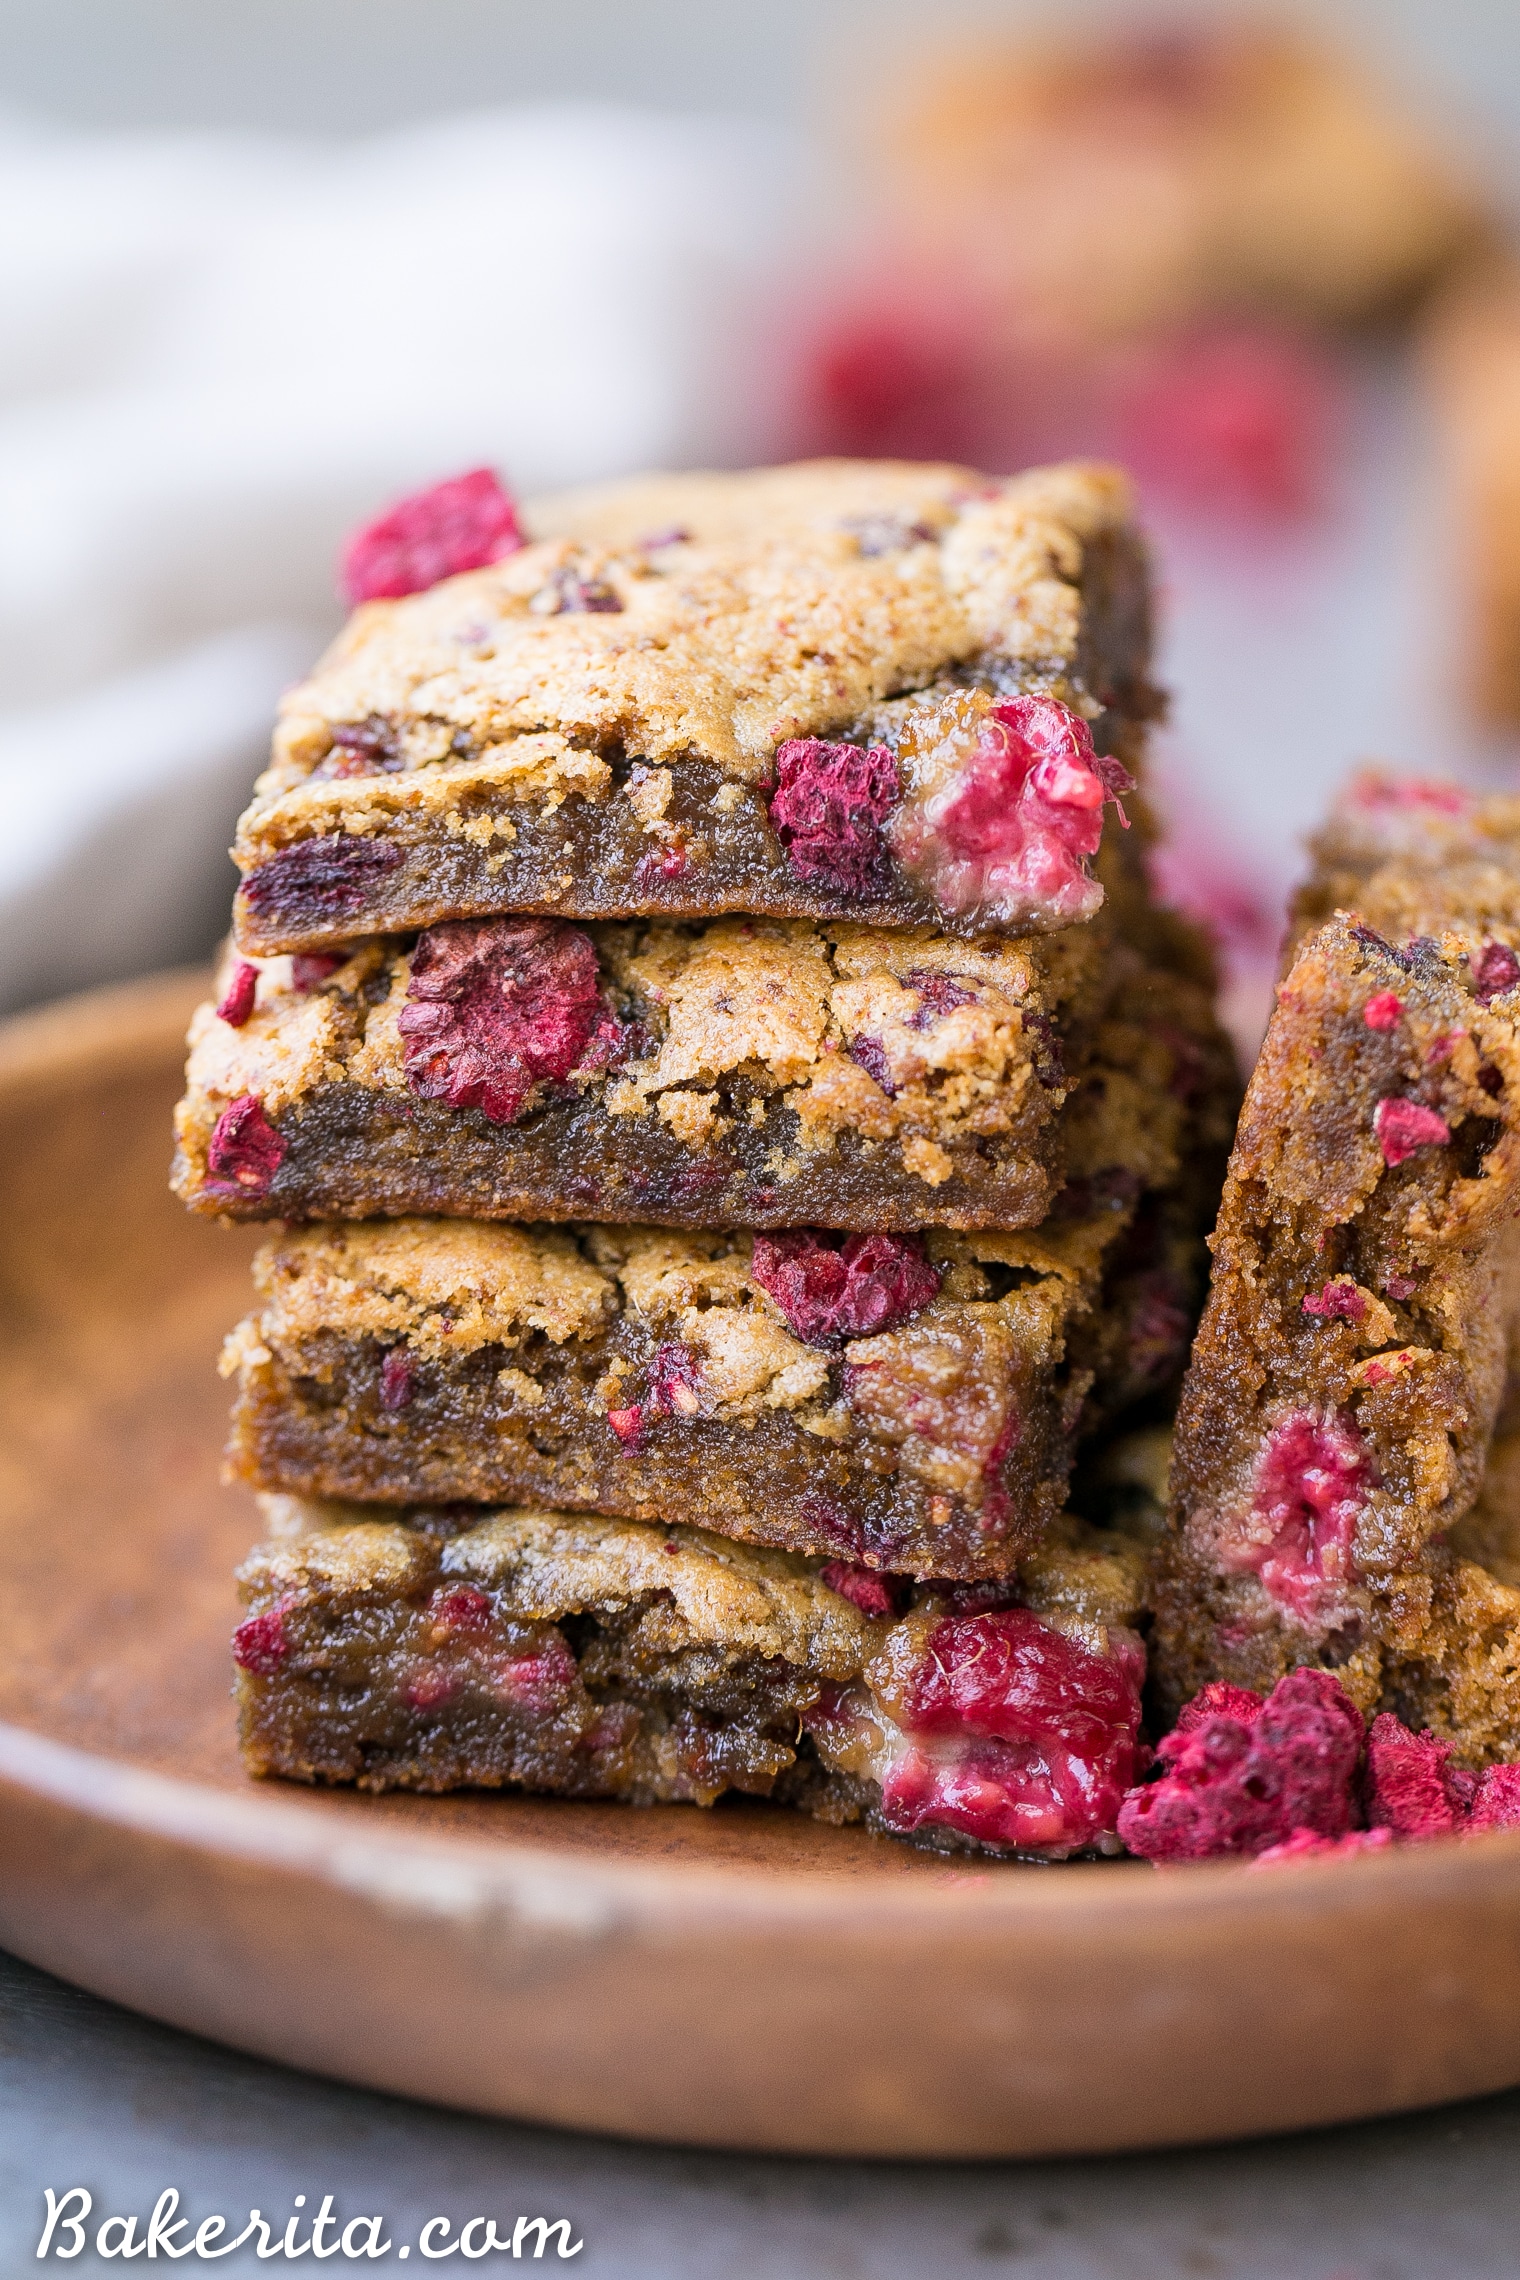 These Raspberry Blondies are incredibly soft and chewy and full of bright berry flavor. These gluten-free, Paleo and vegan blondies are made with cashew butter, coconut flour, and fresh raspberries!